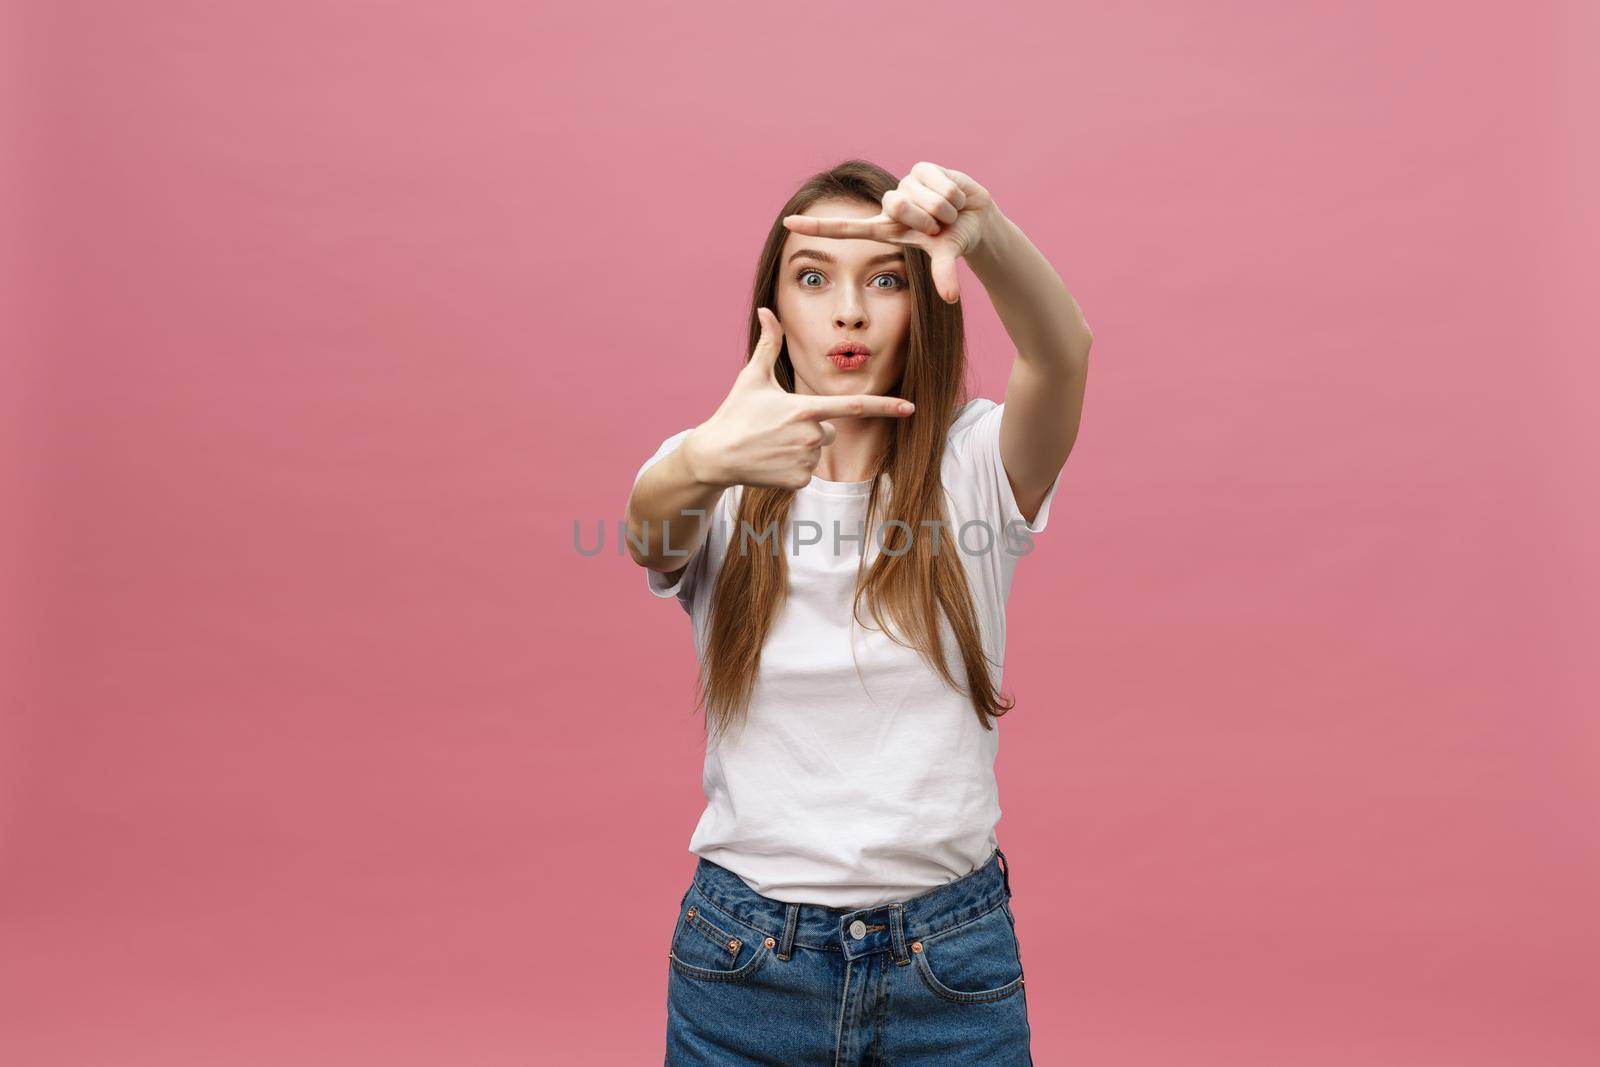 Cheerful young woman keeping mouth wide open, looking surprised, making hands photo frame gesture isolated on bright pink background